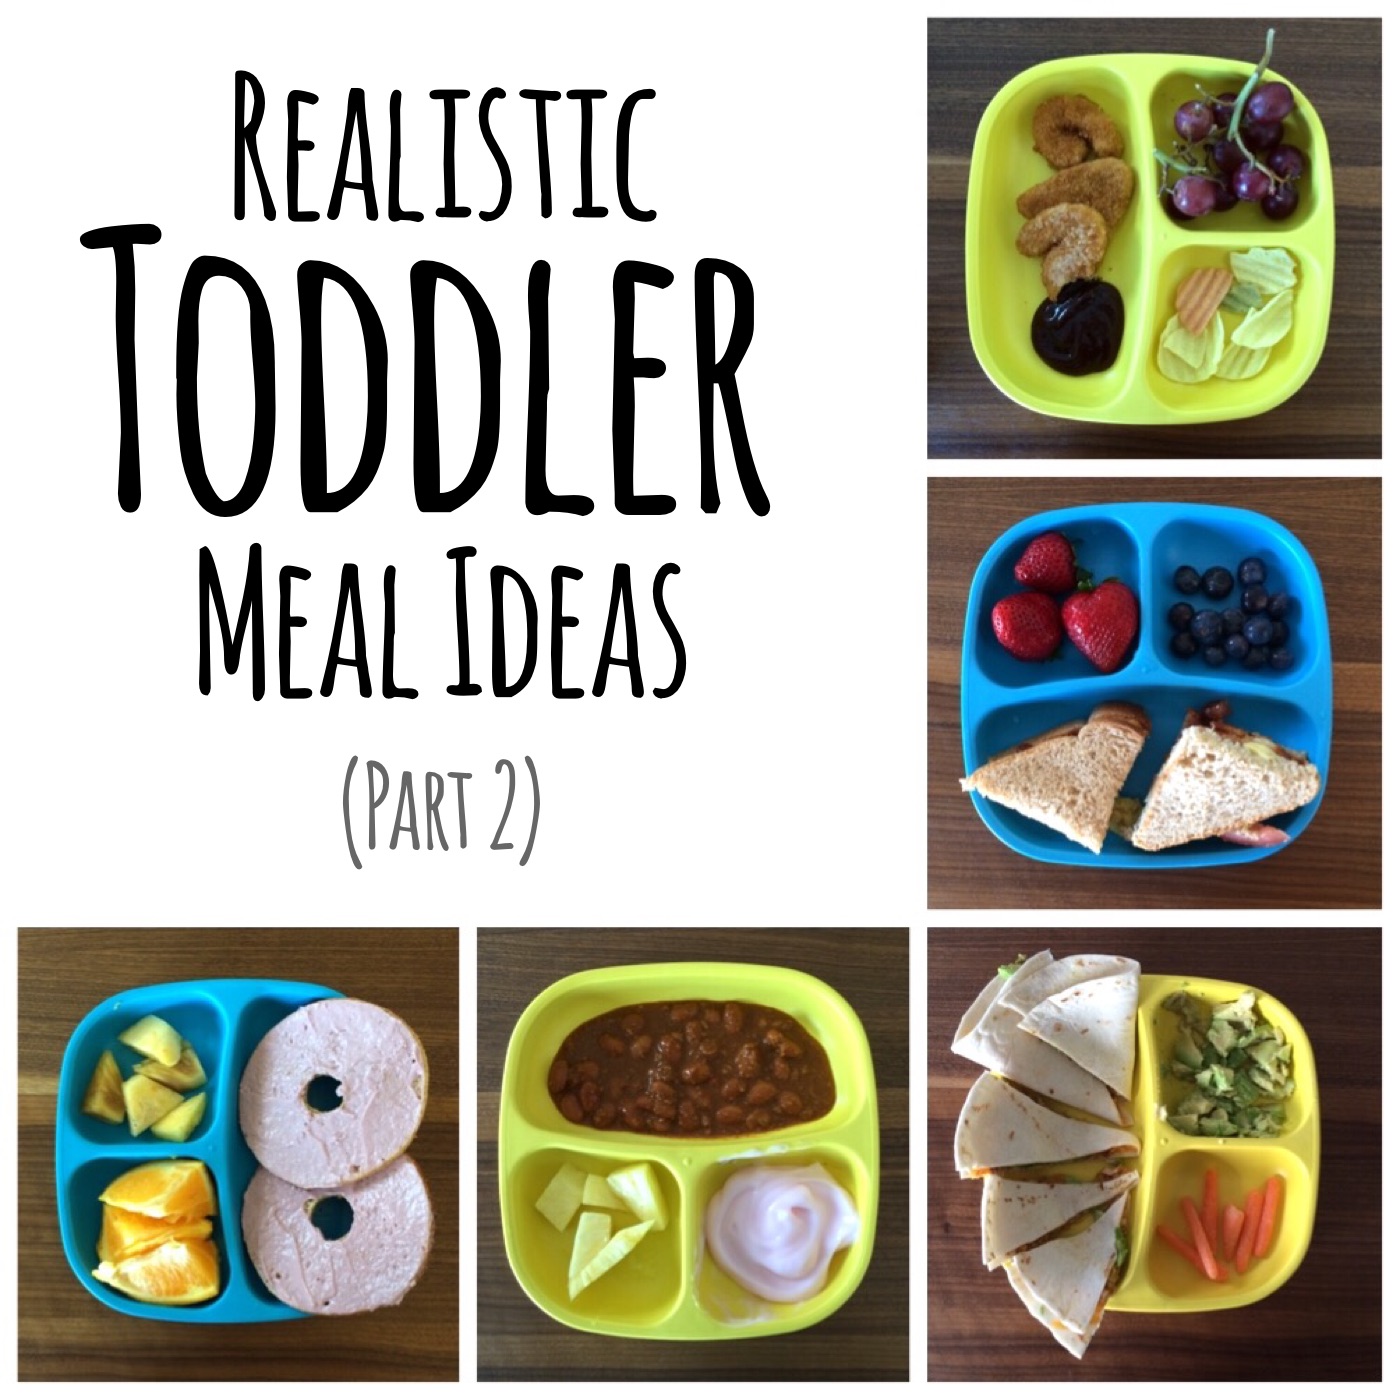 Realistic Toddler Meal Ideas Part 2 - Lou Lou Girls